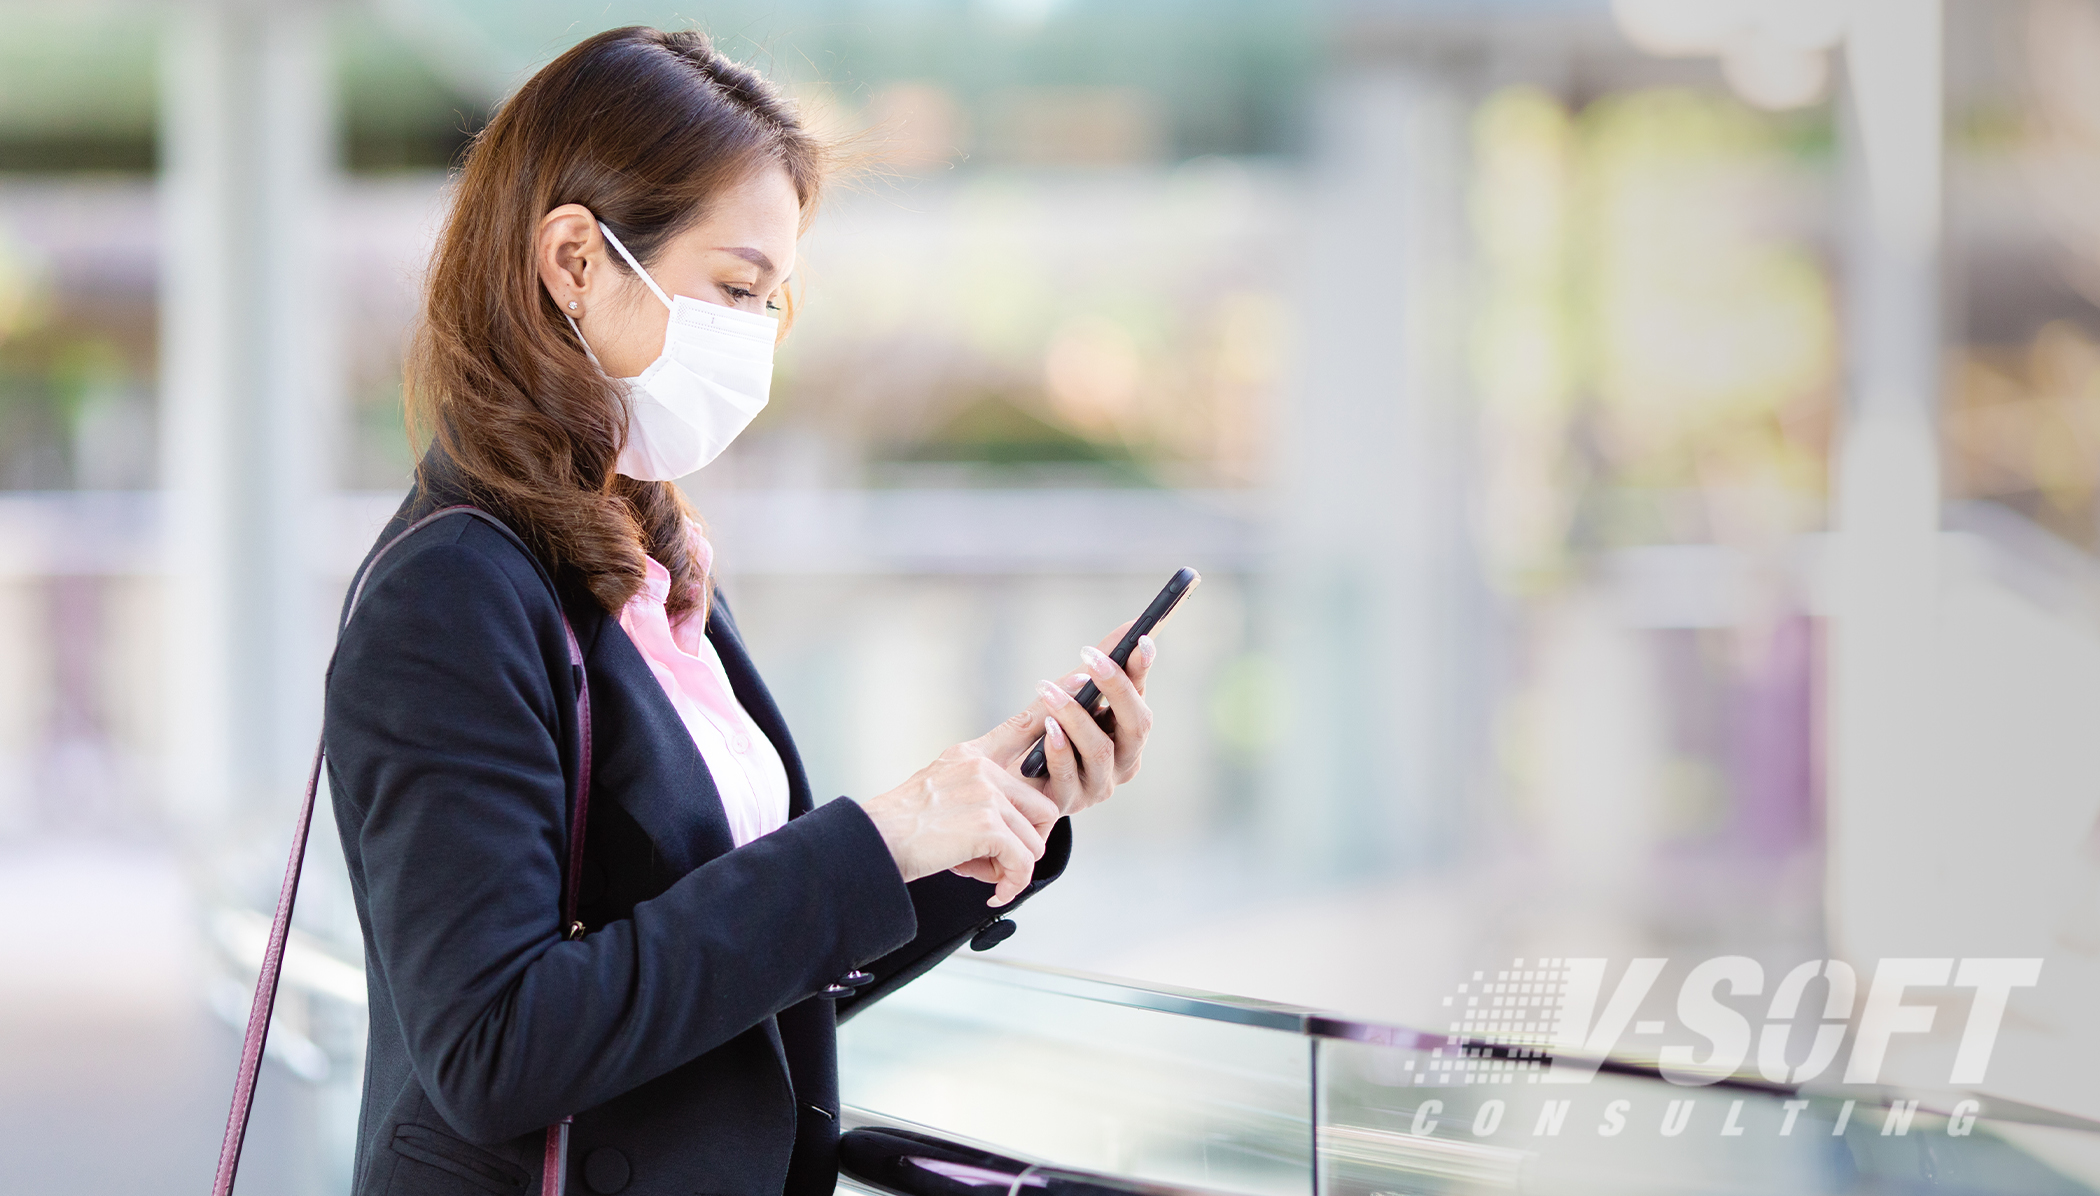 Woman with mask takes self-certification survey via mobile device upon entering the workplace